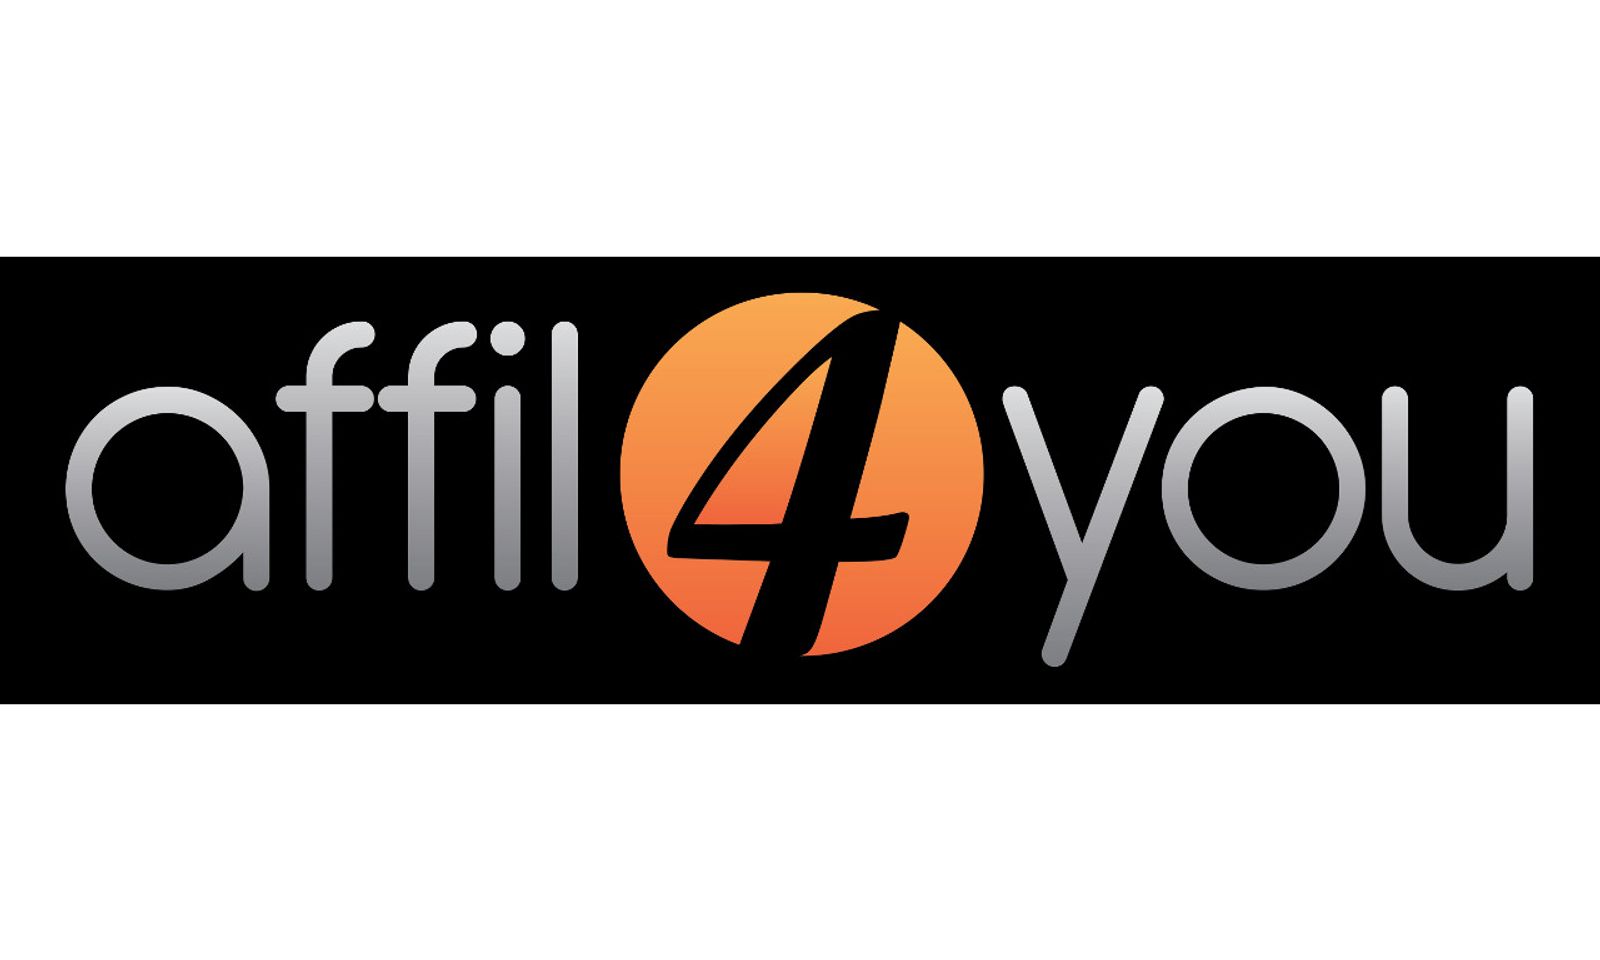 Affil4you Hires Ines Petersen as Director of Sales